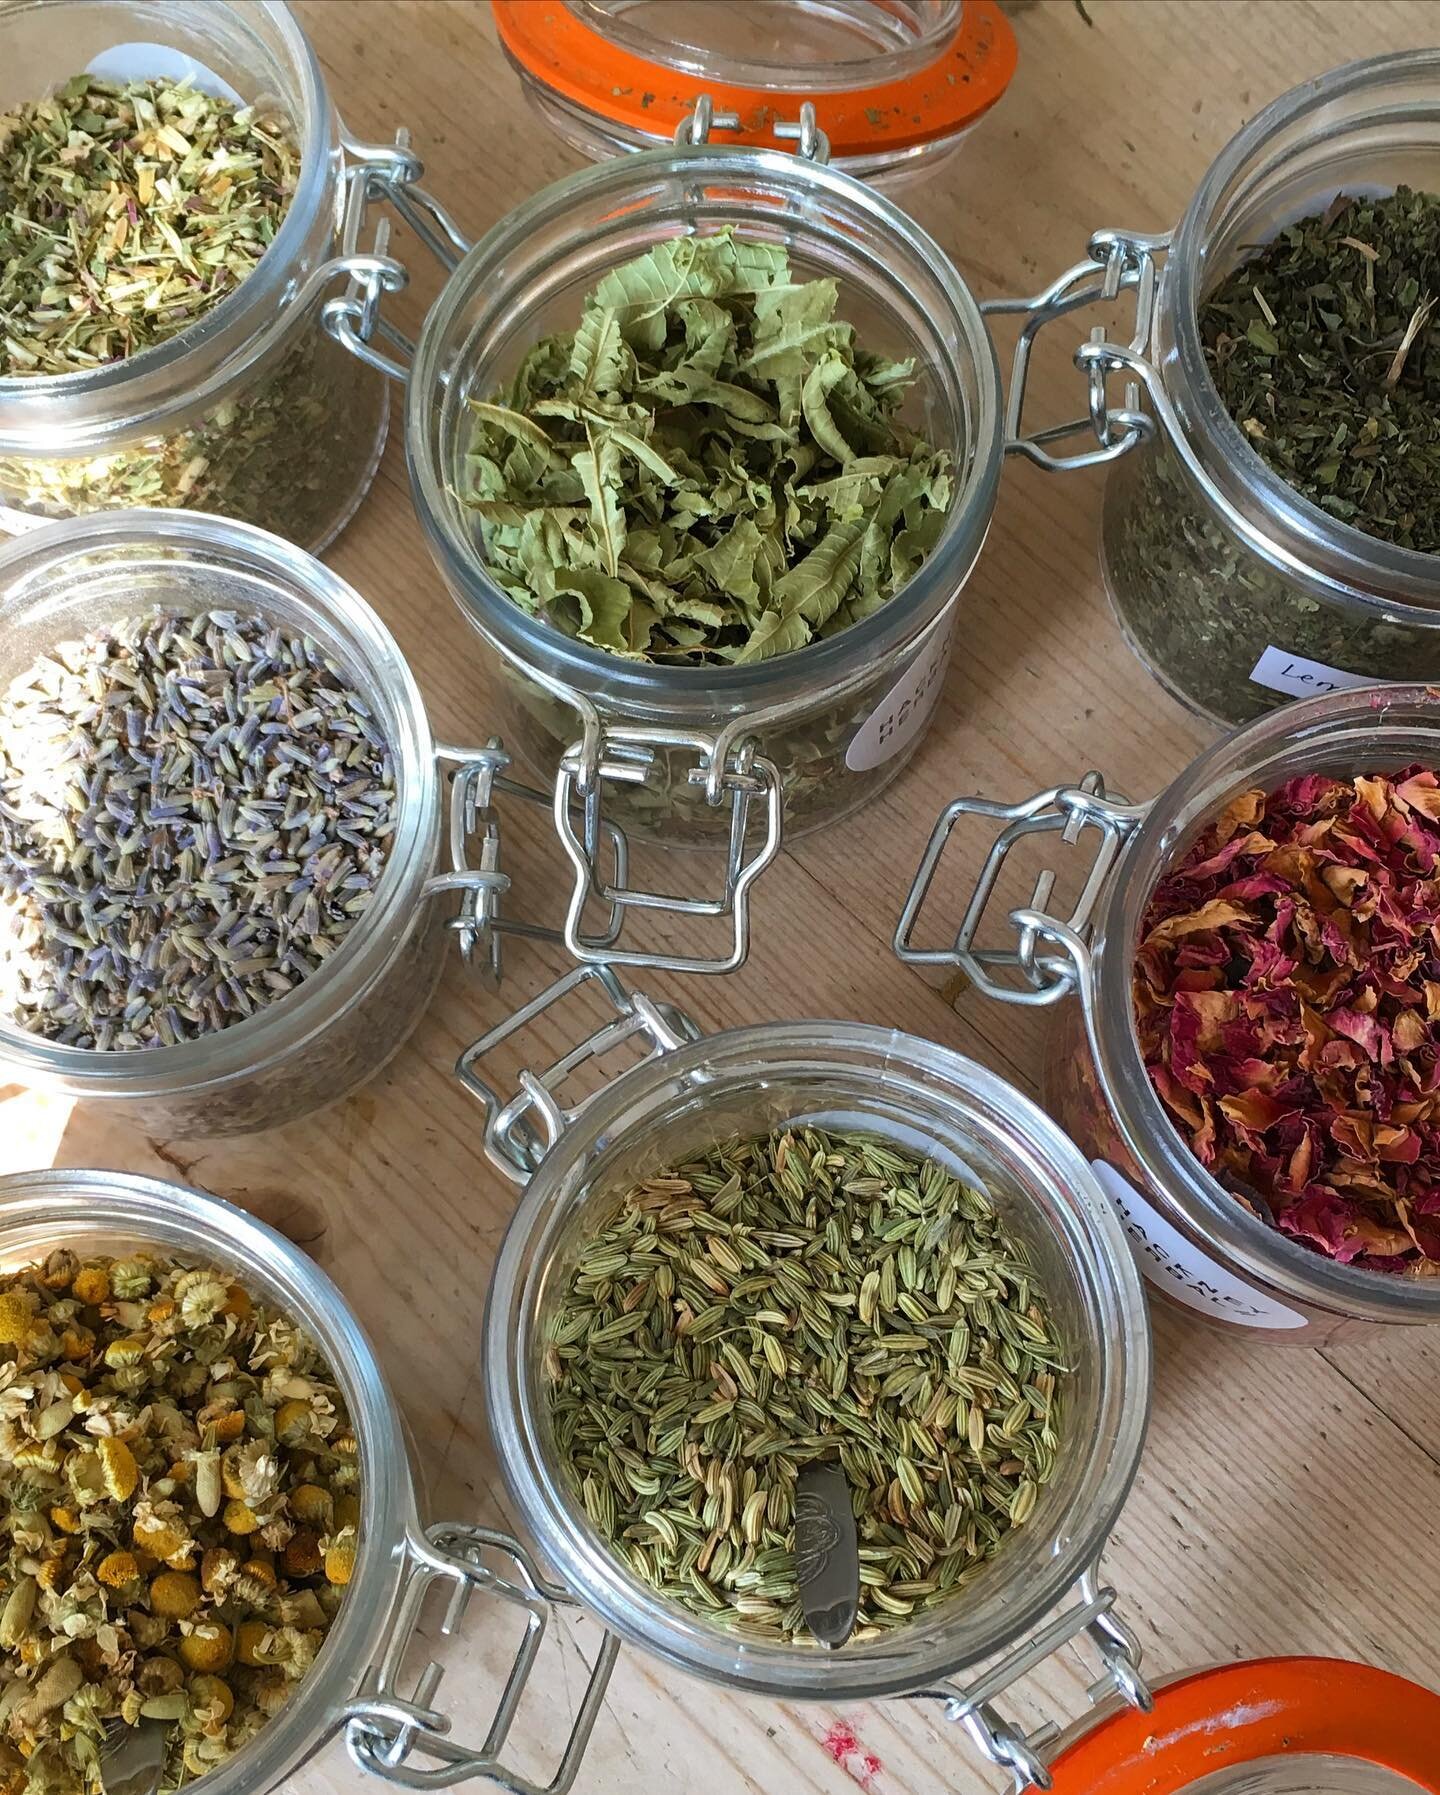 Herbal Remedies: Blend Your Own Herbal Tea Workshop 
📅 Thursday 8th February, 6.30-8pm
🏢HH studio, 8-20 Well Street, E9 7PX

Join us for an evening workshop guiding you through the healing properties of some of our favourite herbs. Together we will